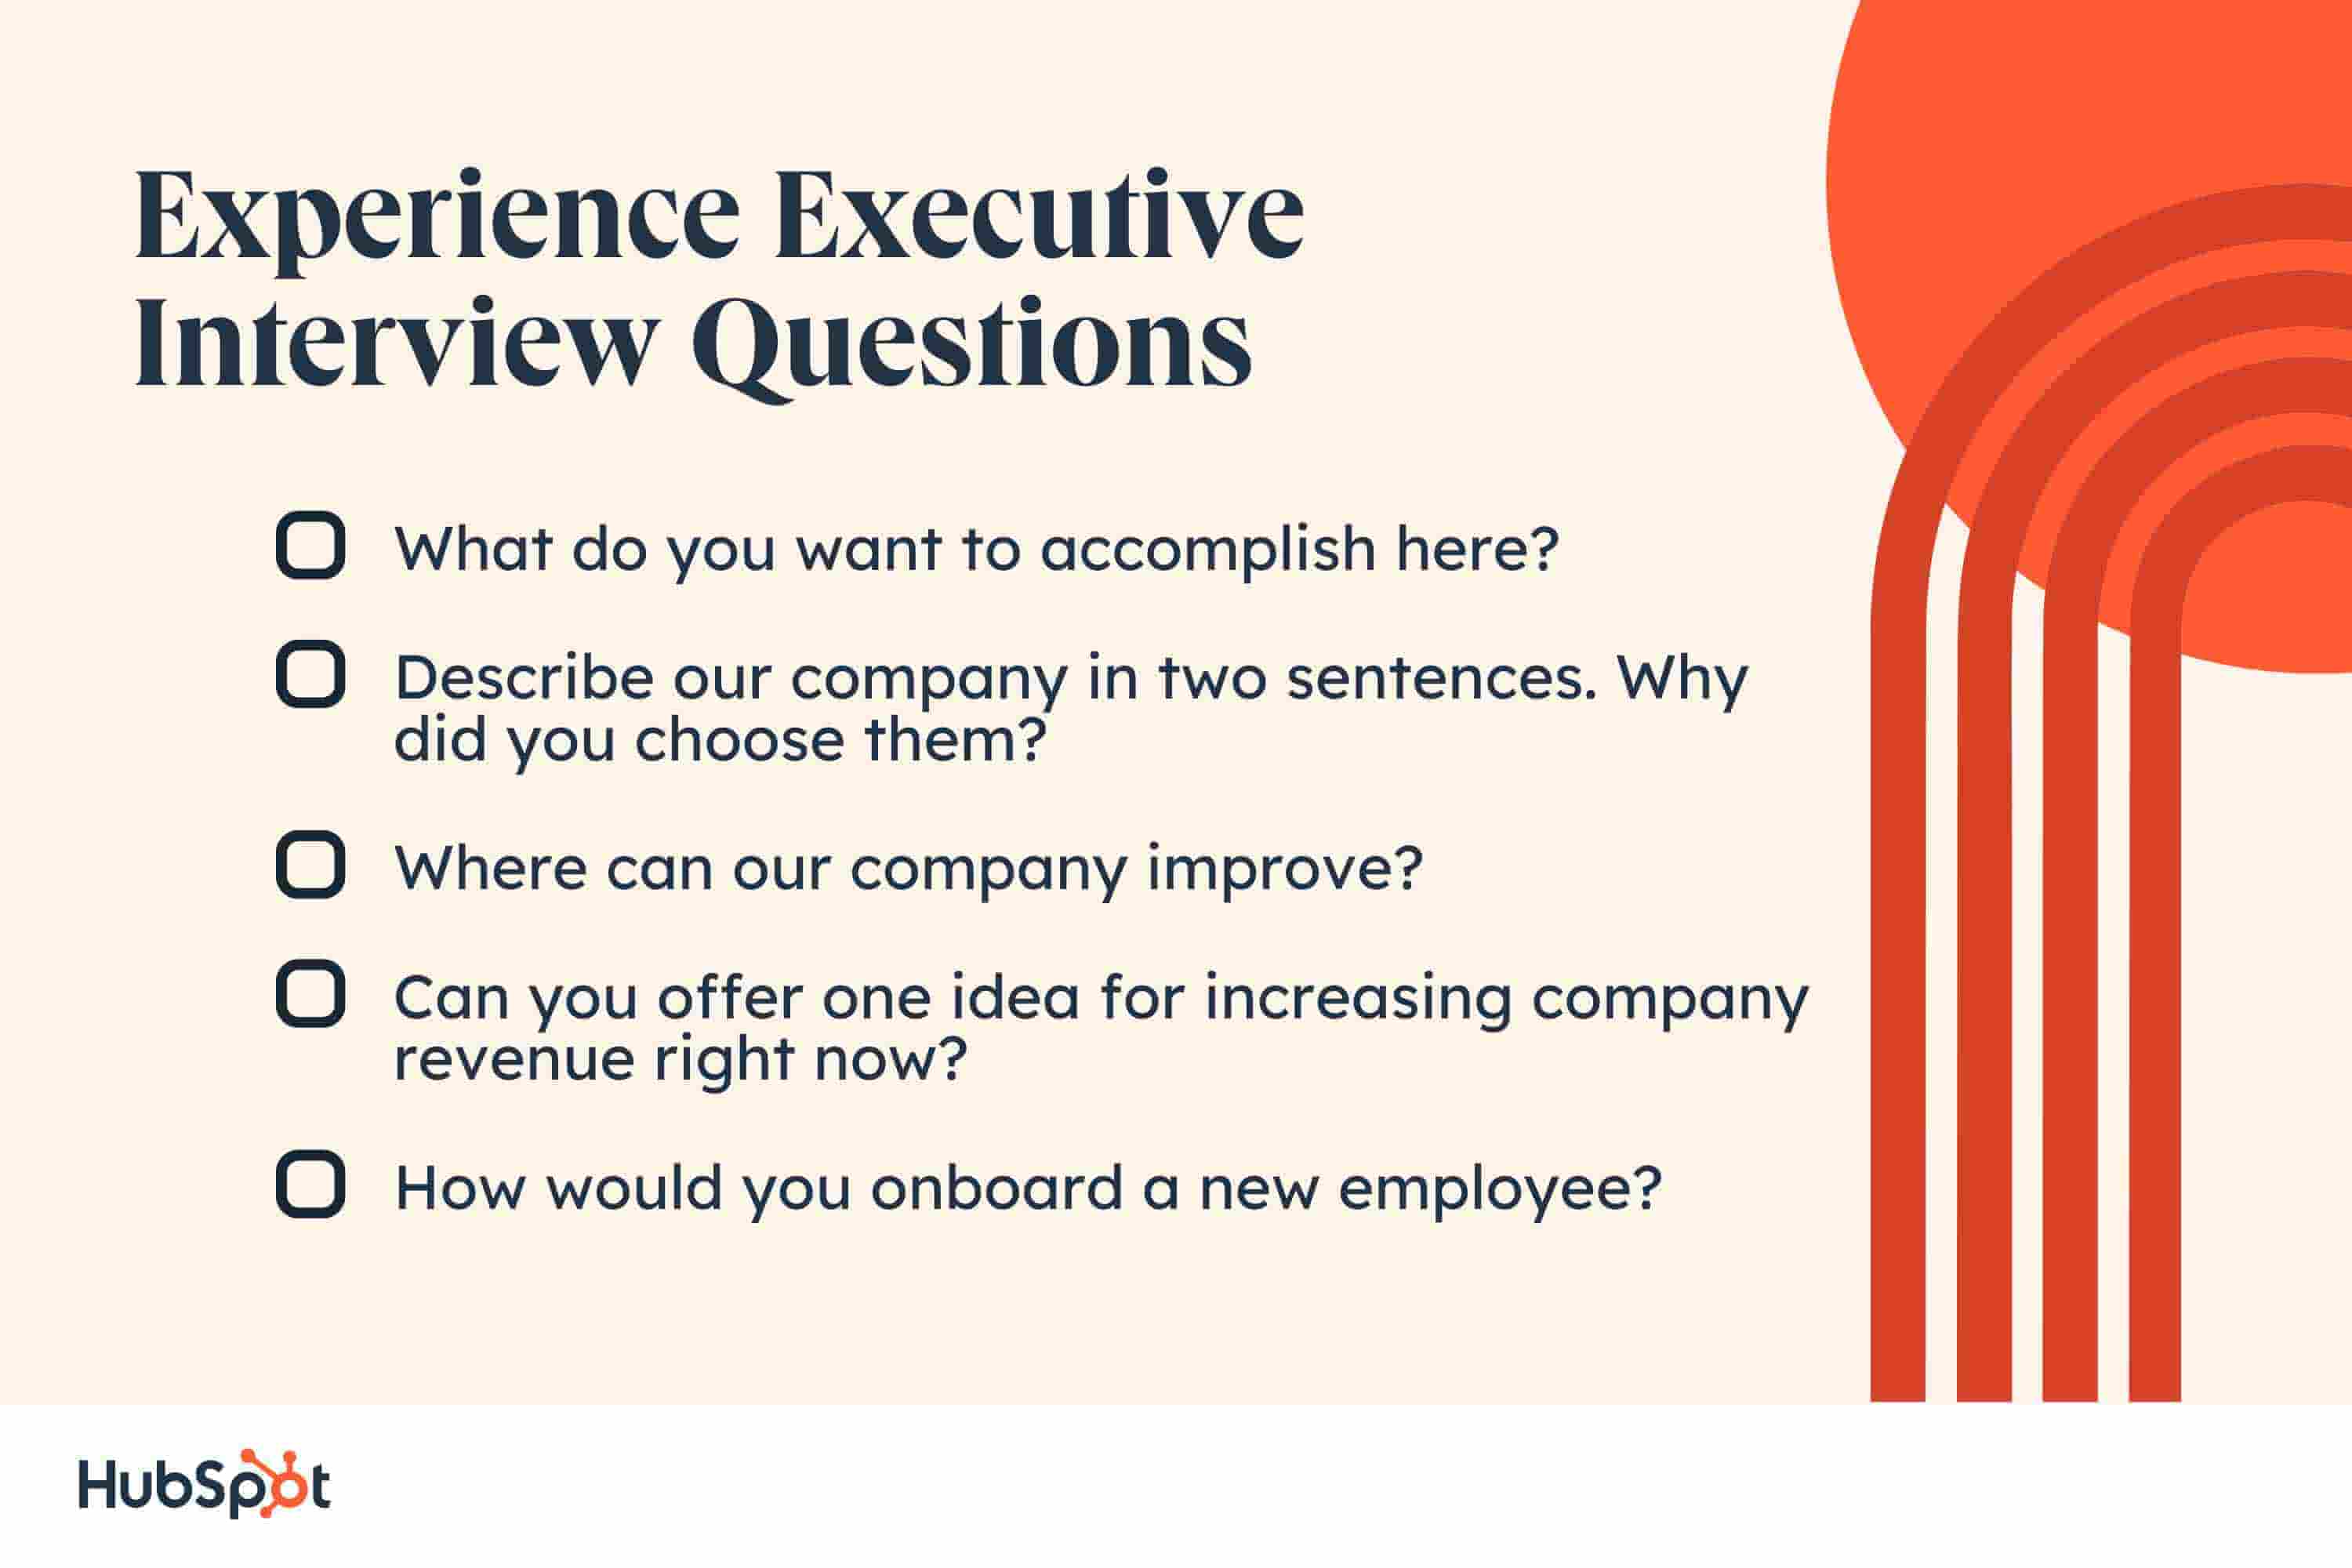 experience executive interview questions, What do you want to accomplish here? Describe our company in two sentences. Why did you choose them? Where can our company improve? Can you offer one idea for increasing company revenue right now? How would you onboard a new employee?